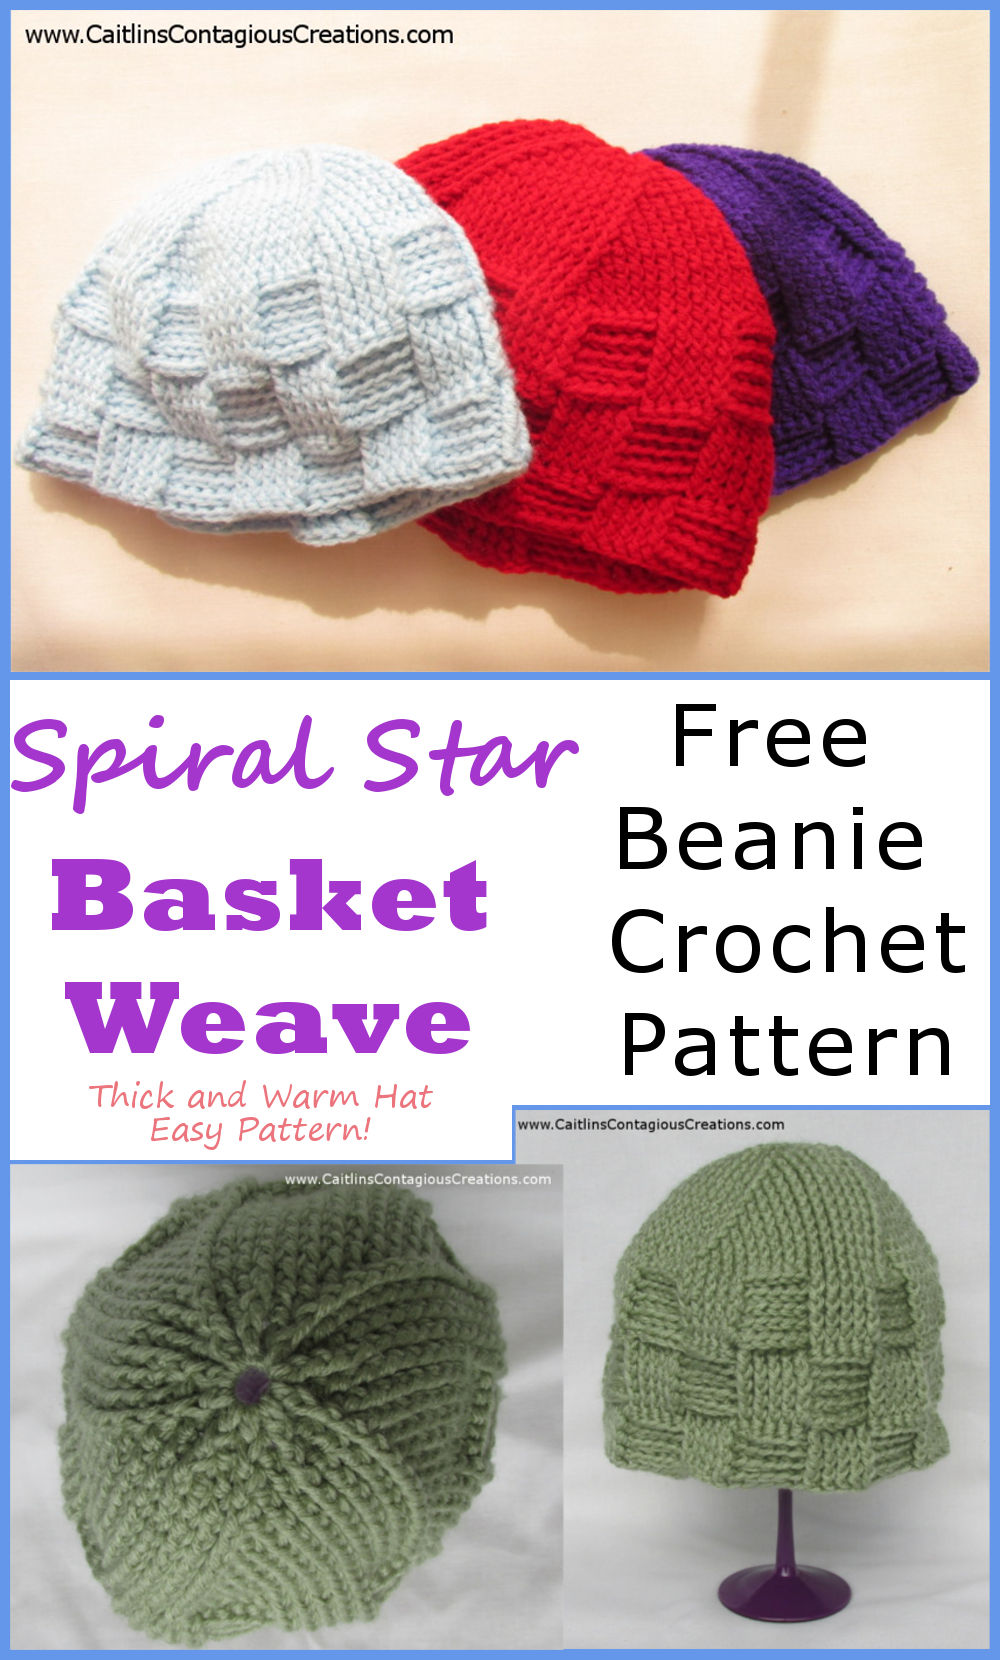 Free Spiral Star Basket Weave Beanie Crochet Pattern from Caitlin's Contagious Creations. This thick and warm hat has a beautiful cabled spiral star pattern on top and basket weave texture on the sides. A free beginner friendly winter hat design that works up quickly.